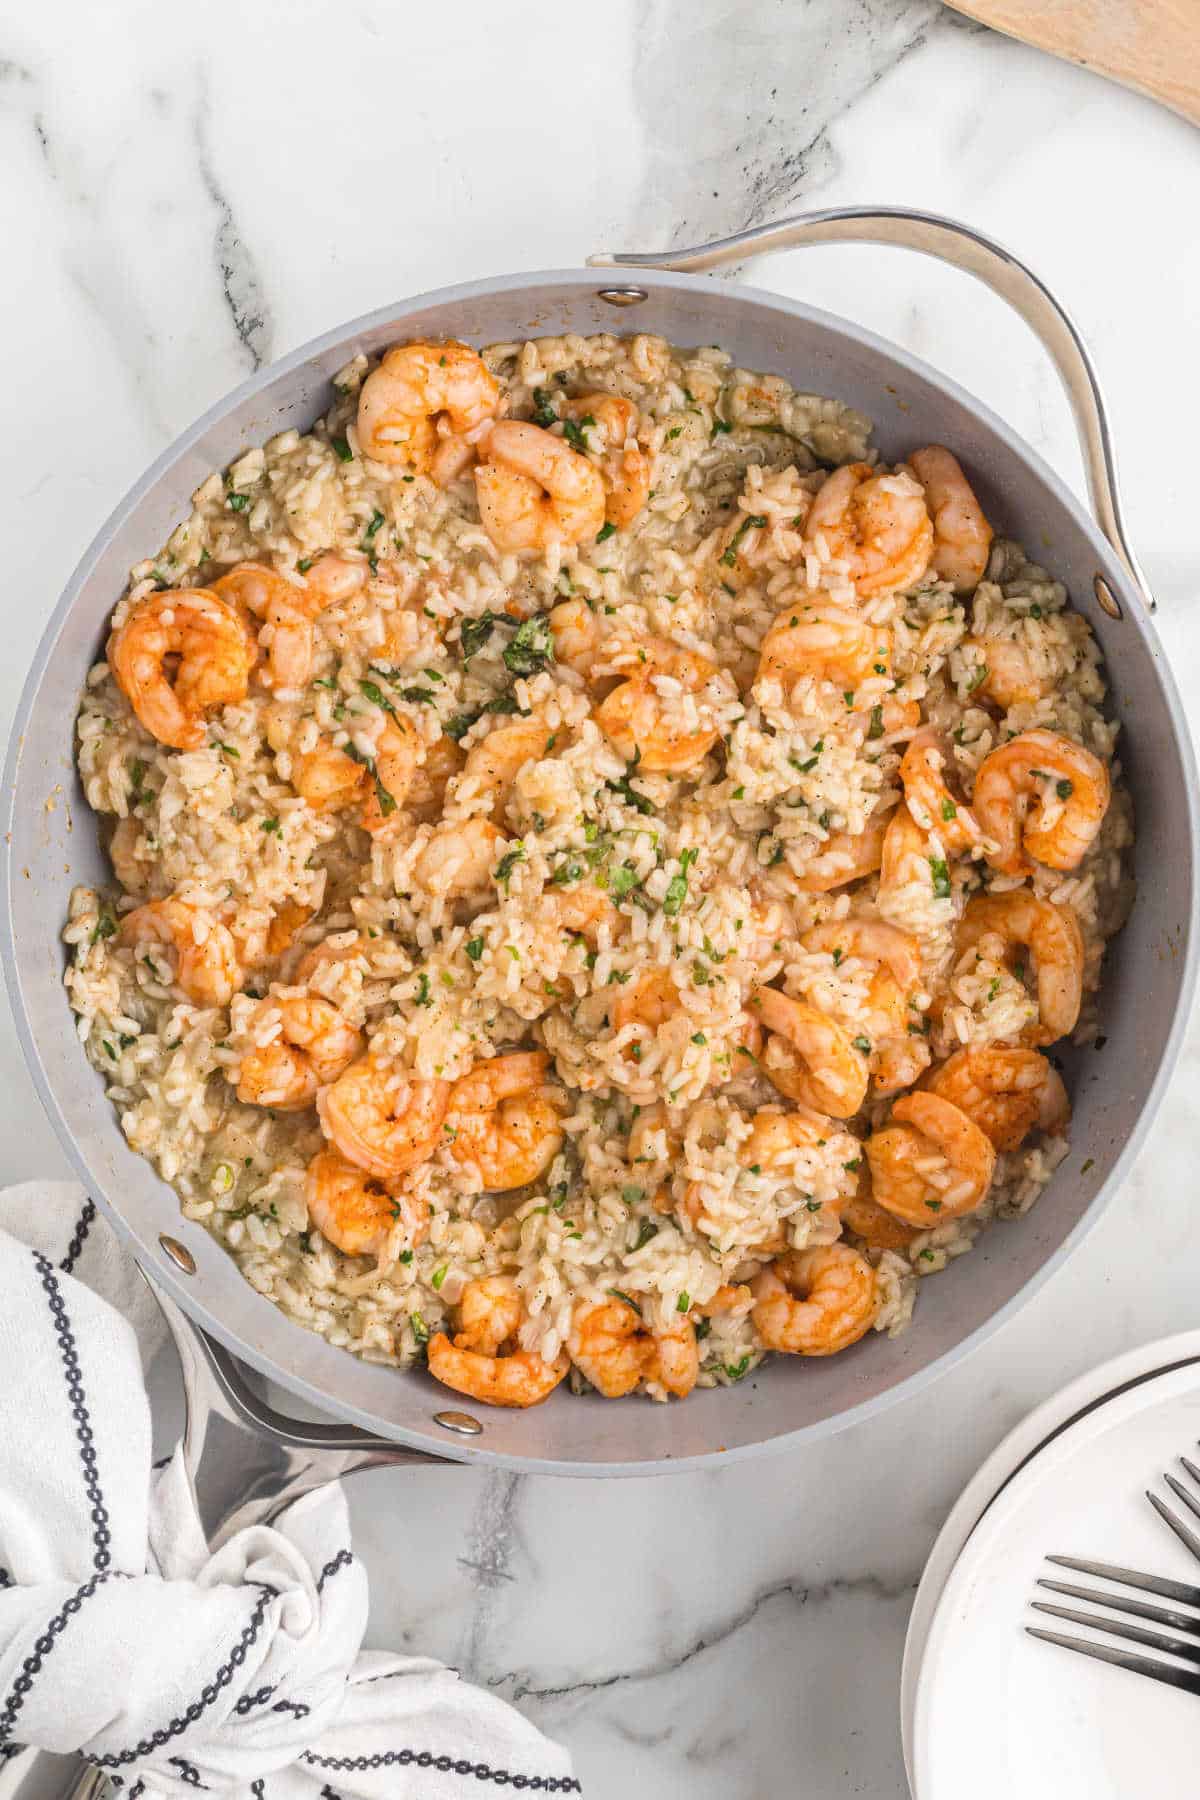 A large skillet filled with the completed shrimp risotto recipe made with white wine and herbs. 